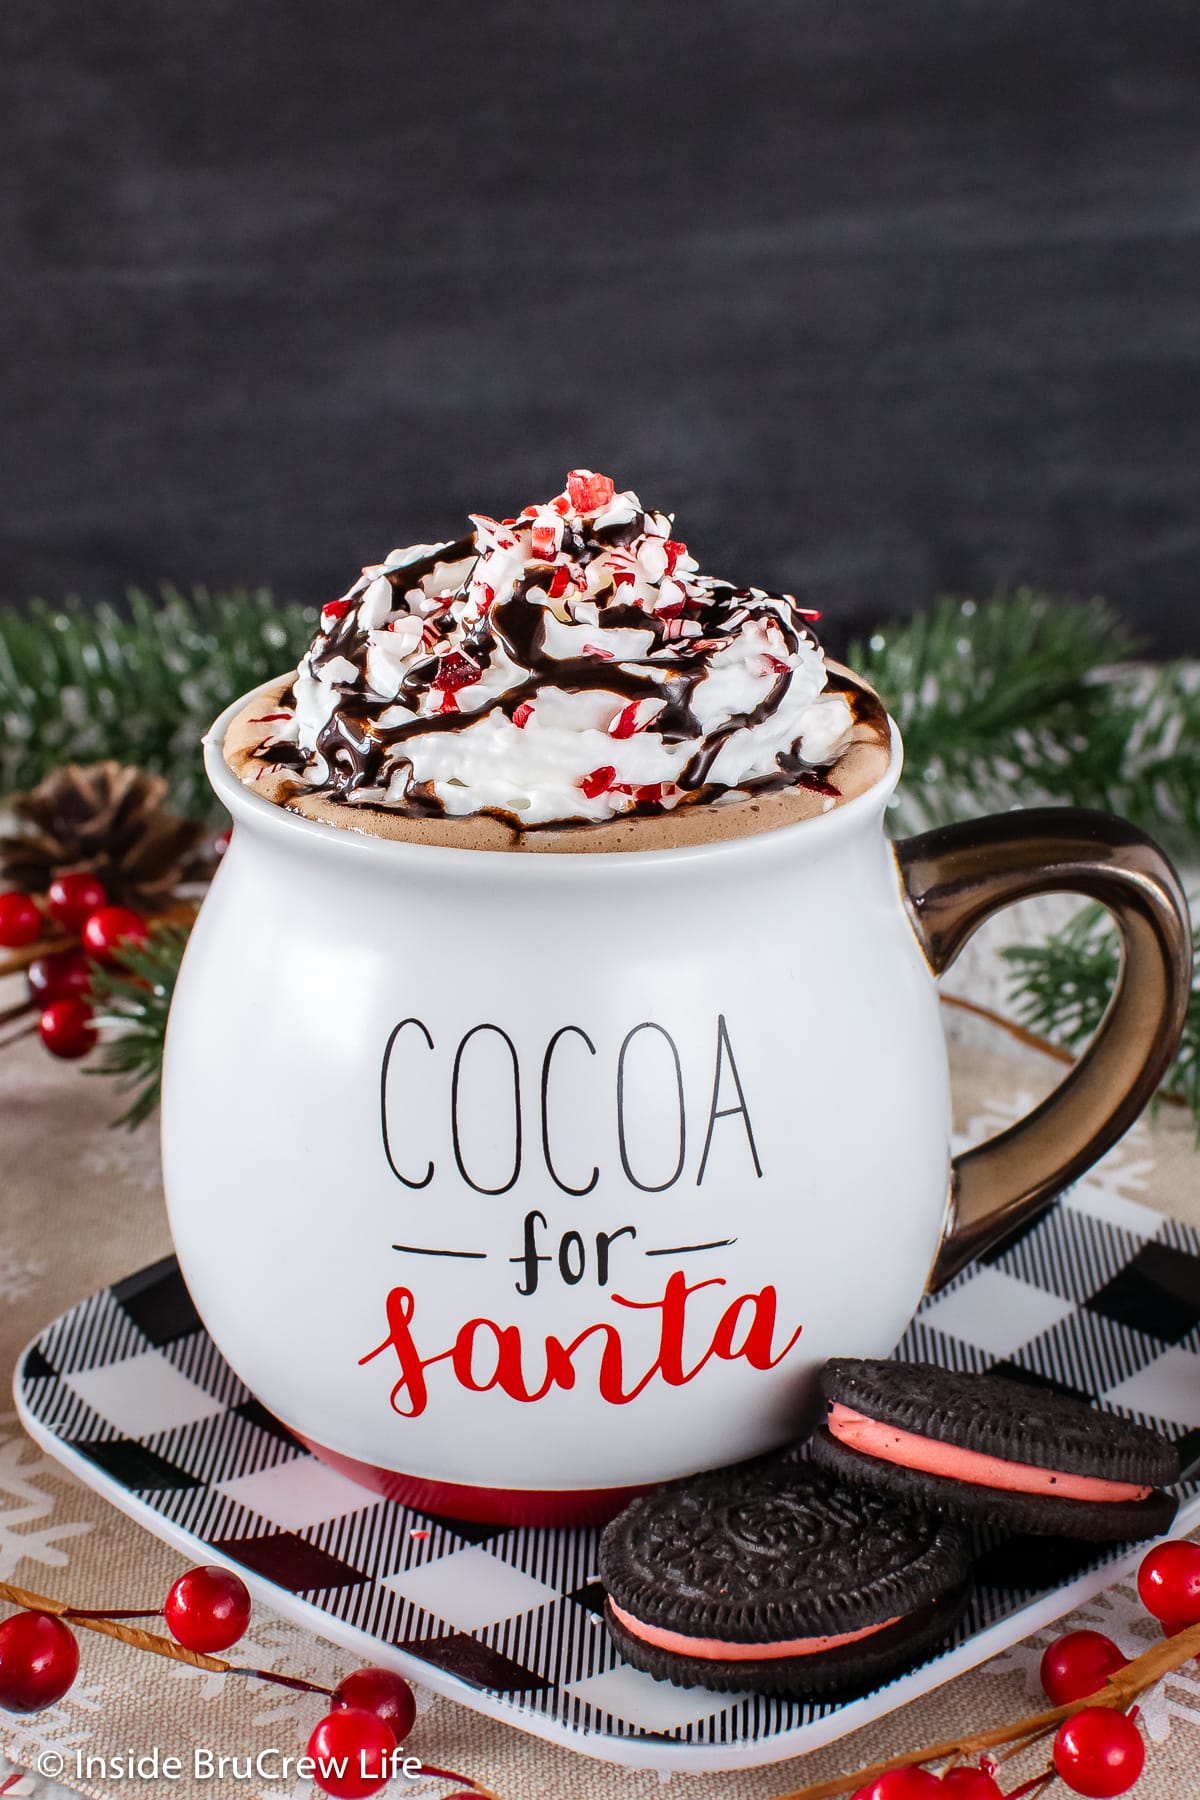 A mug of hot cocoa topped with whipped cream.